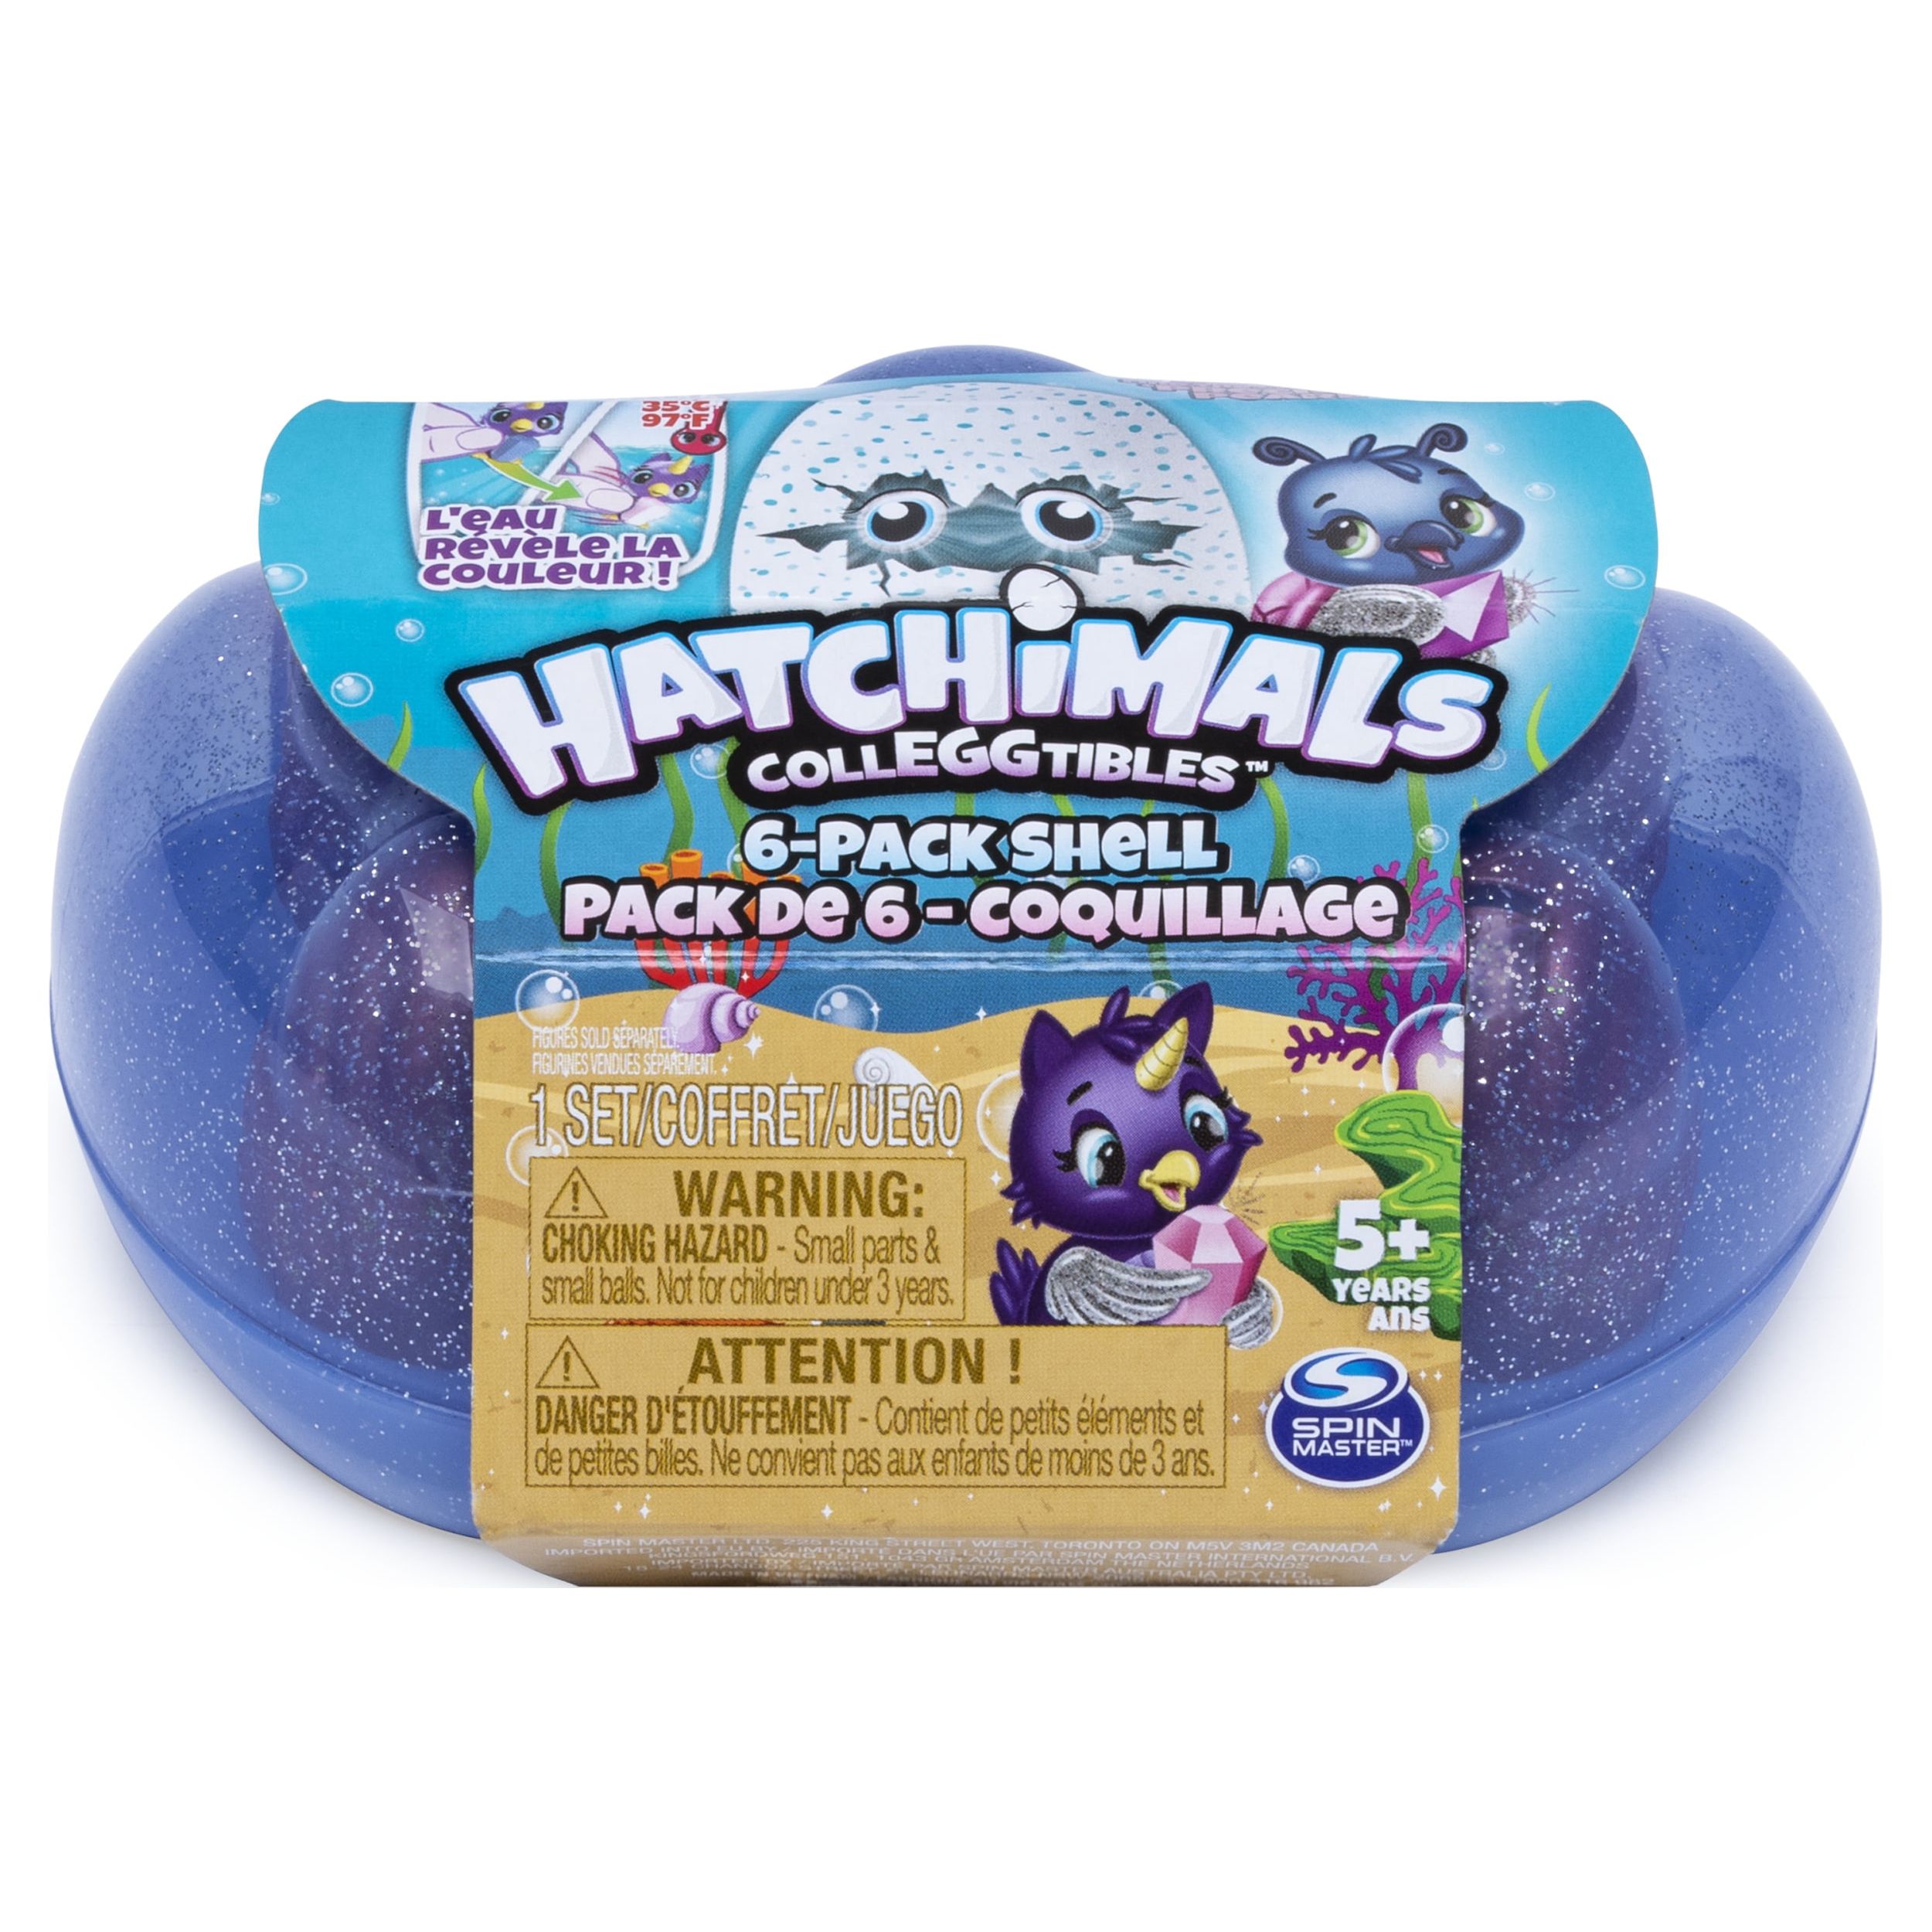 Hatchimals CollEGGtibles, Mermal Magic 6 Pack Shell Carrying Case with Season 5 Hatchimals CollEGGtibles, for Kids Aged 5 and Up (Color May Vary) - image 1 of 8